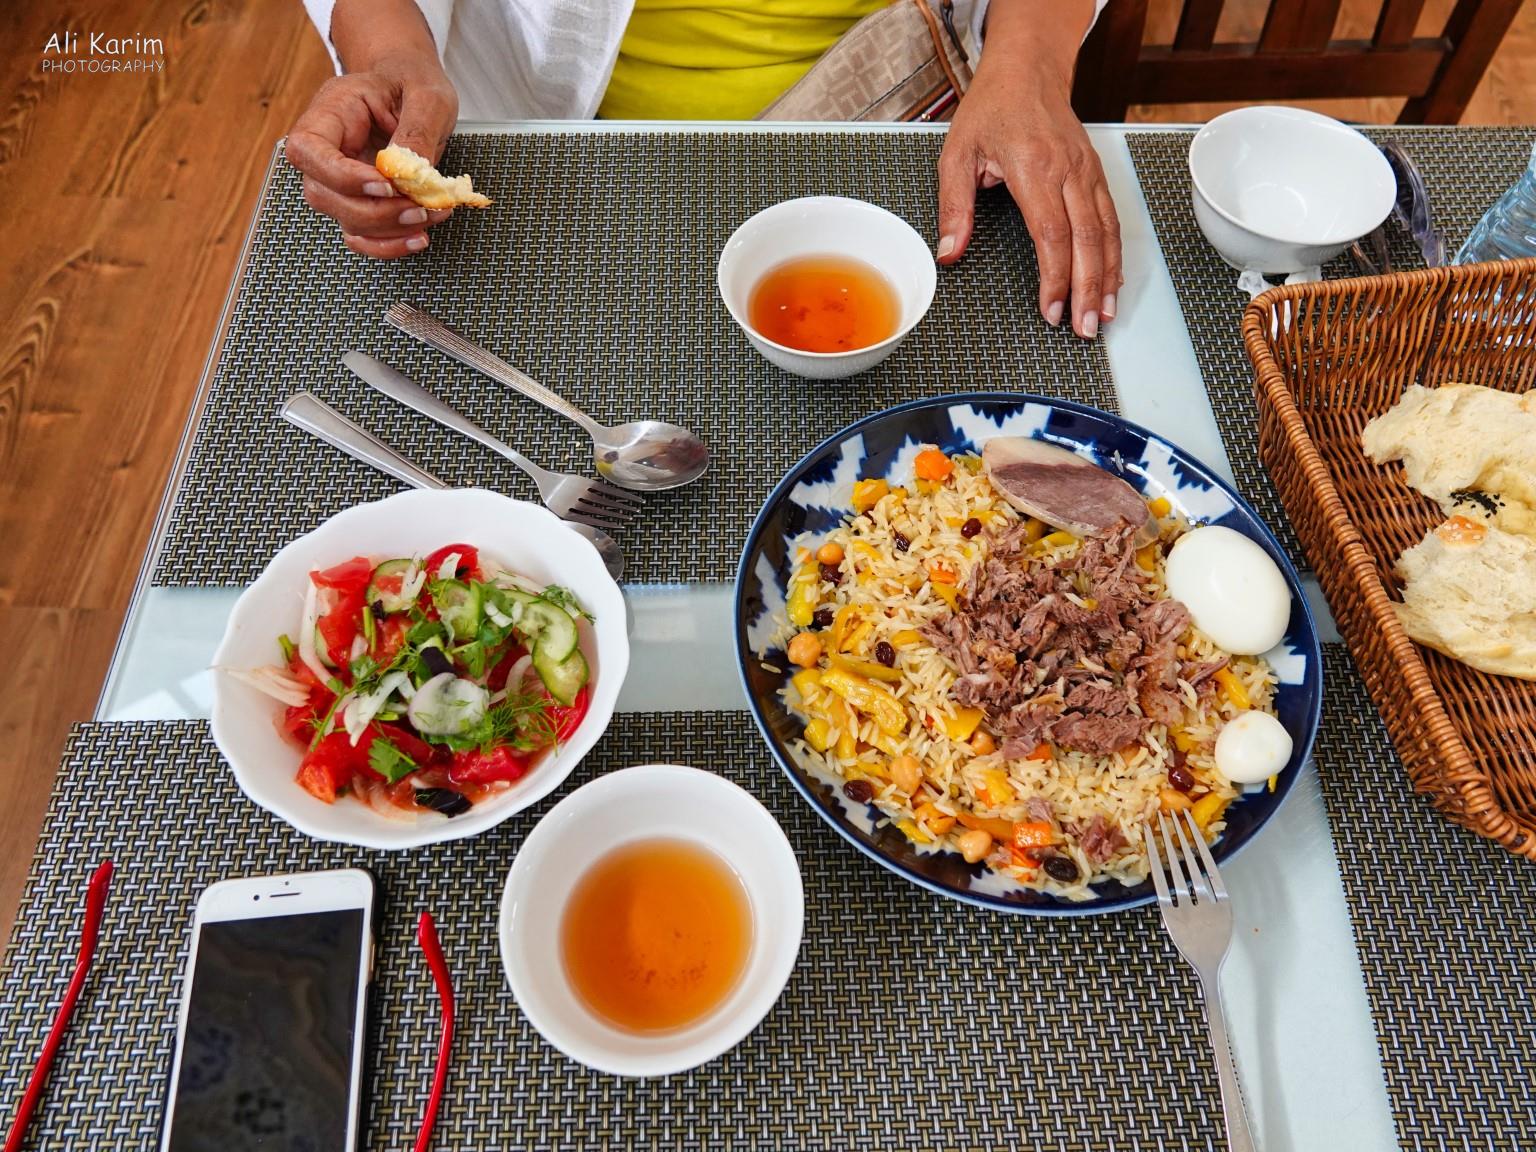 Tashkent, Oct 2019, Our Plov brunch with Chai, bread & salad, at the Plov center. Cost was $8